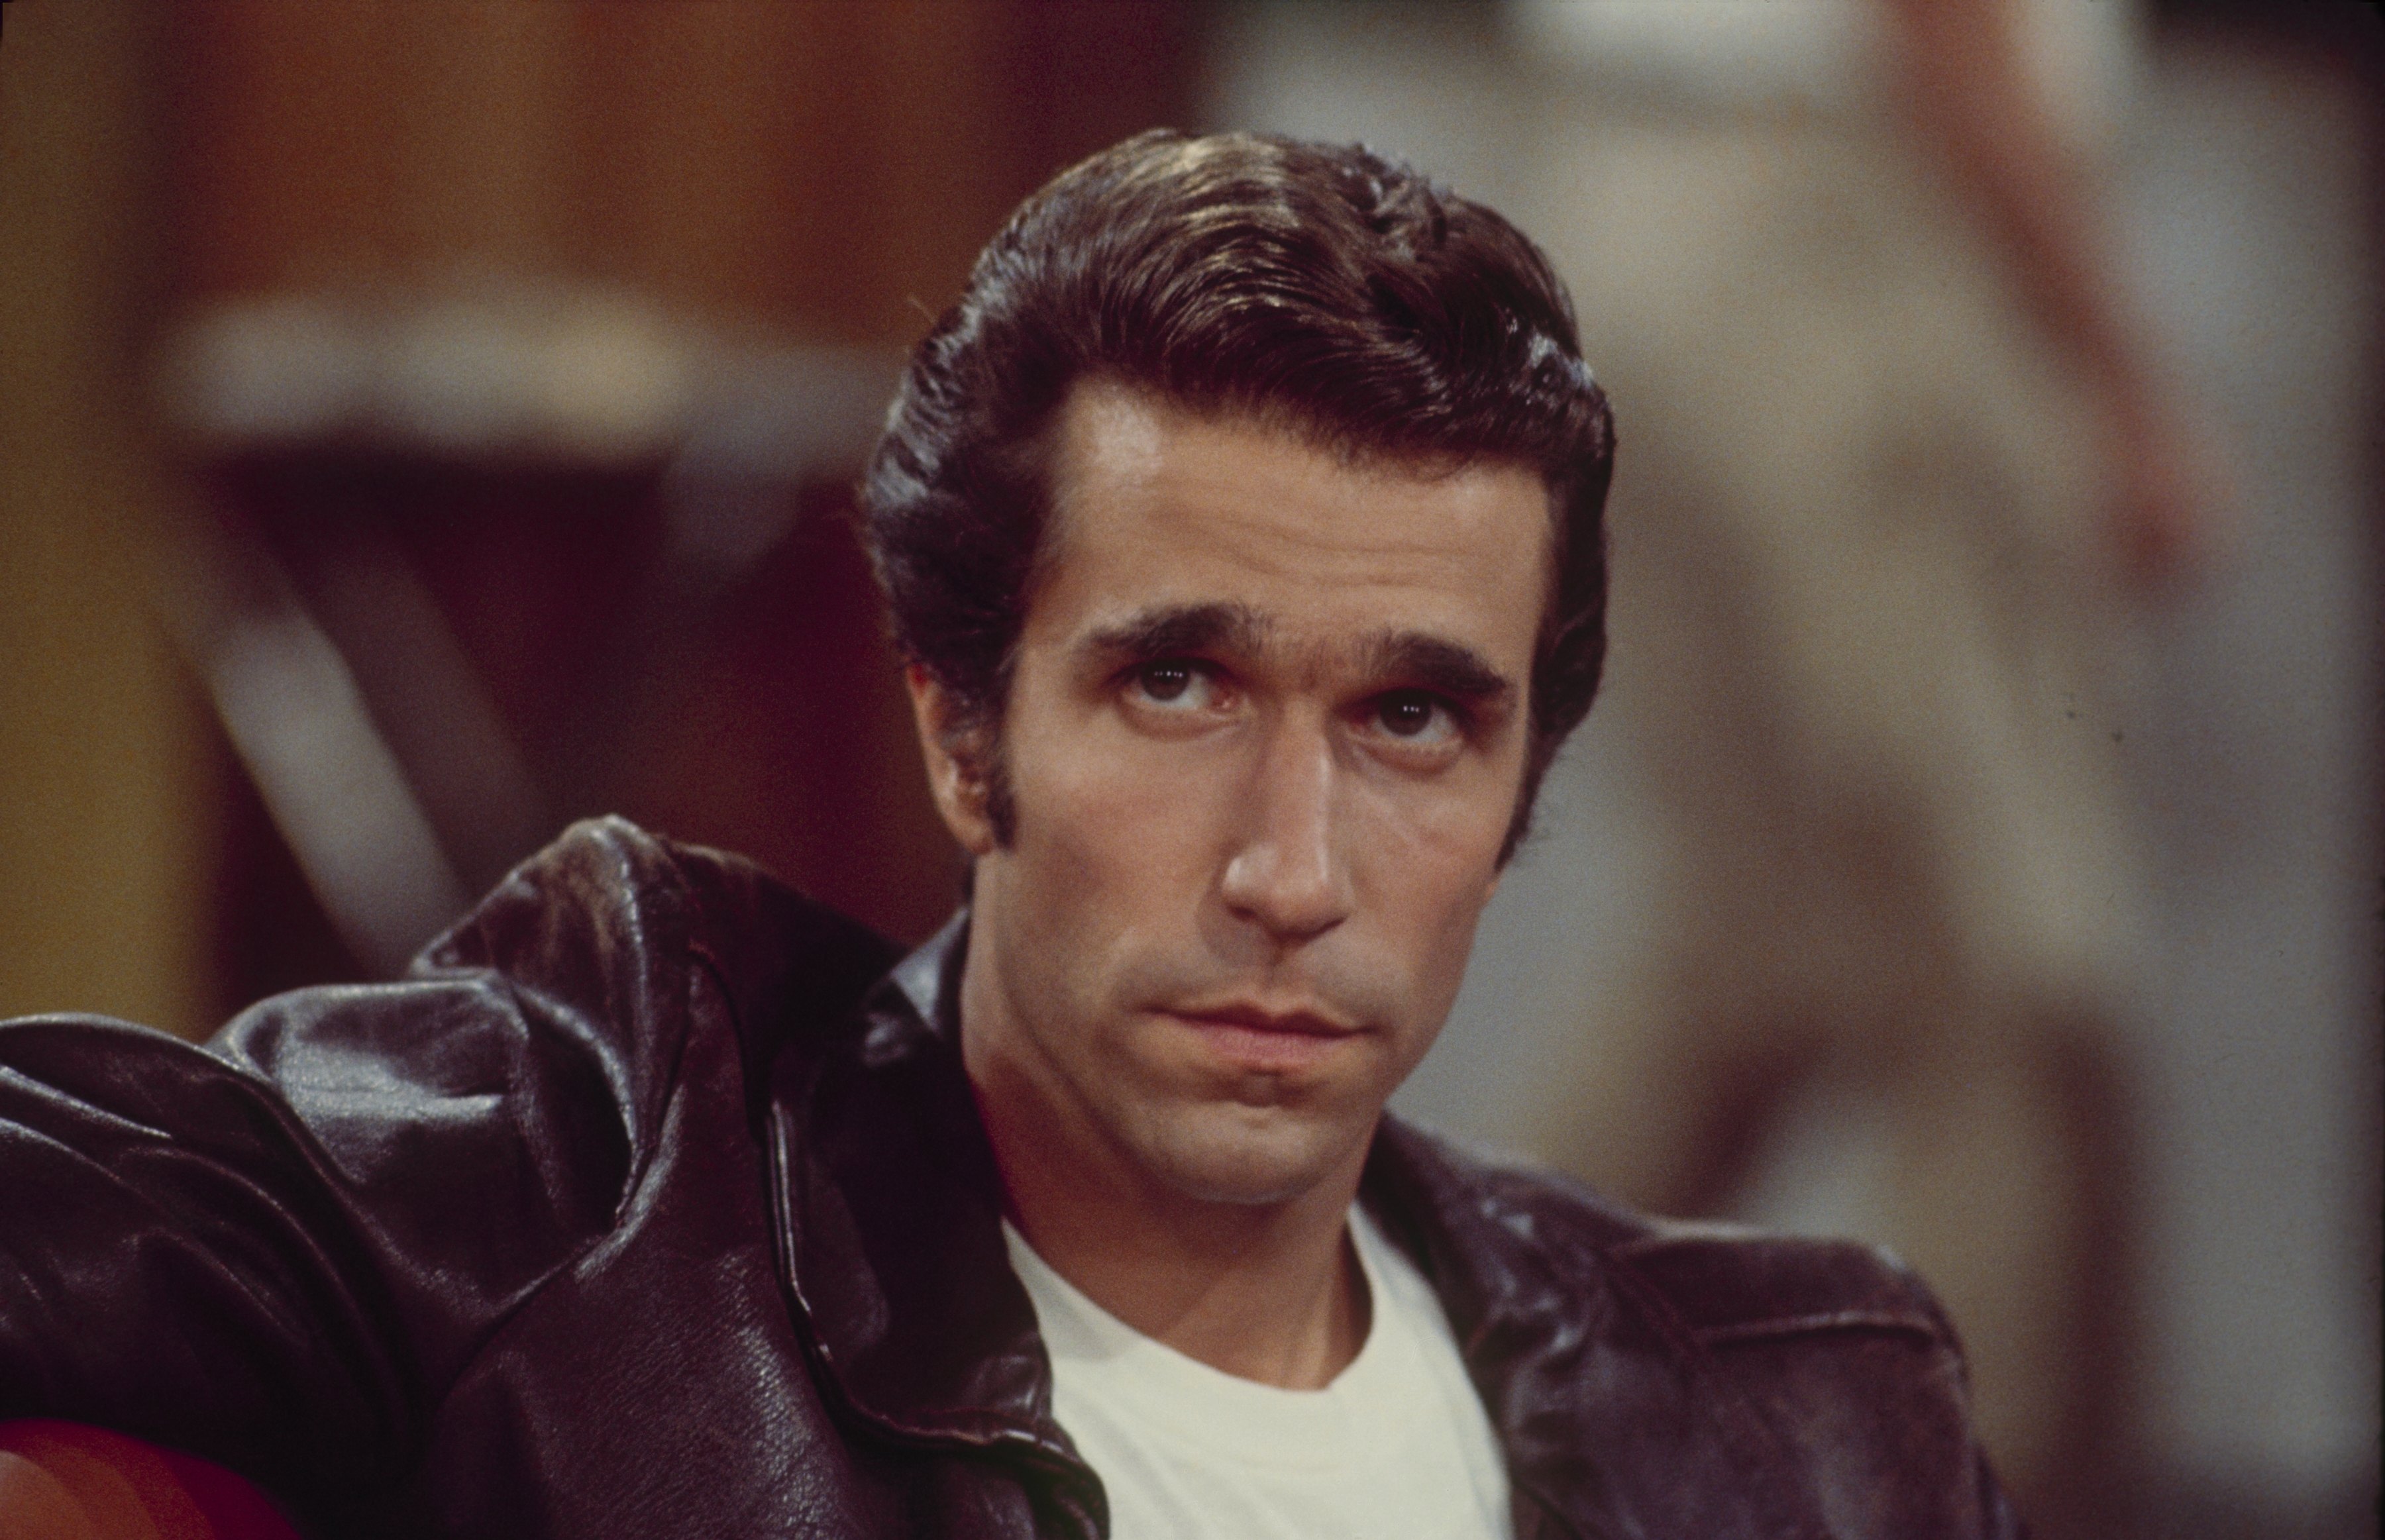 Actor Henry Winkler wears a leather jacket in this 1976 photo as 'Happy Days' character Fonzie.